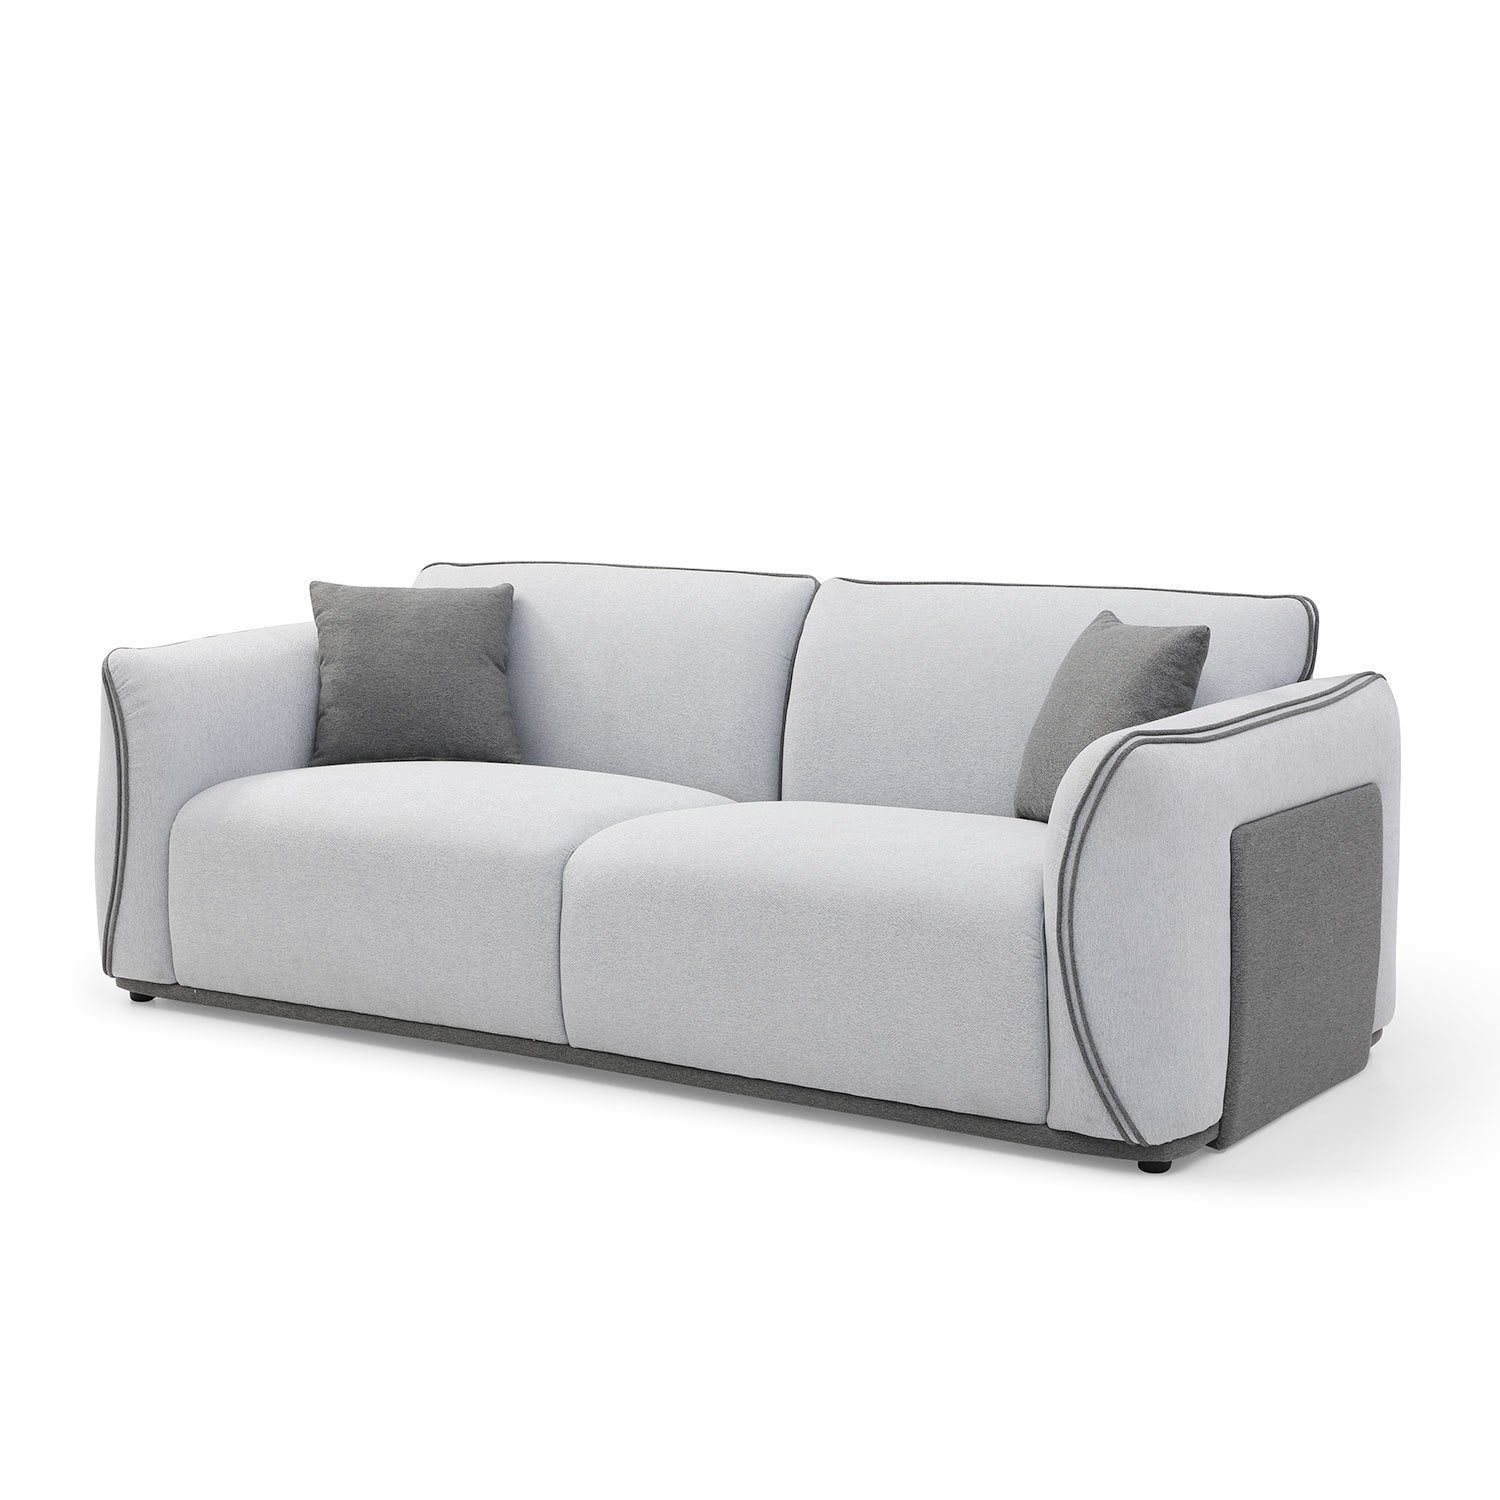 Grey Couch Upholstered Sofa, Modern Sofa for Living Room, Couch for Small Spaces. - Enova Luxe Home Store